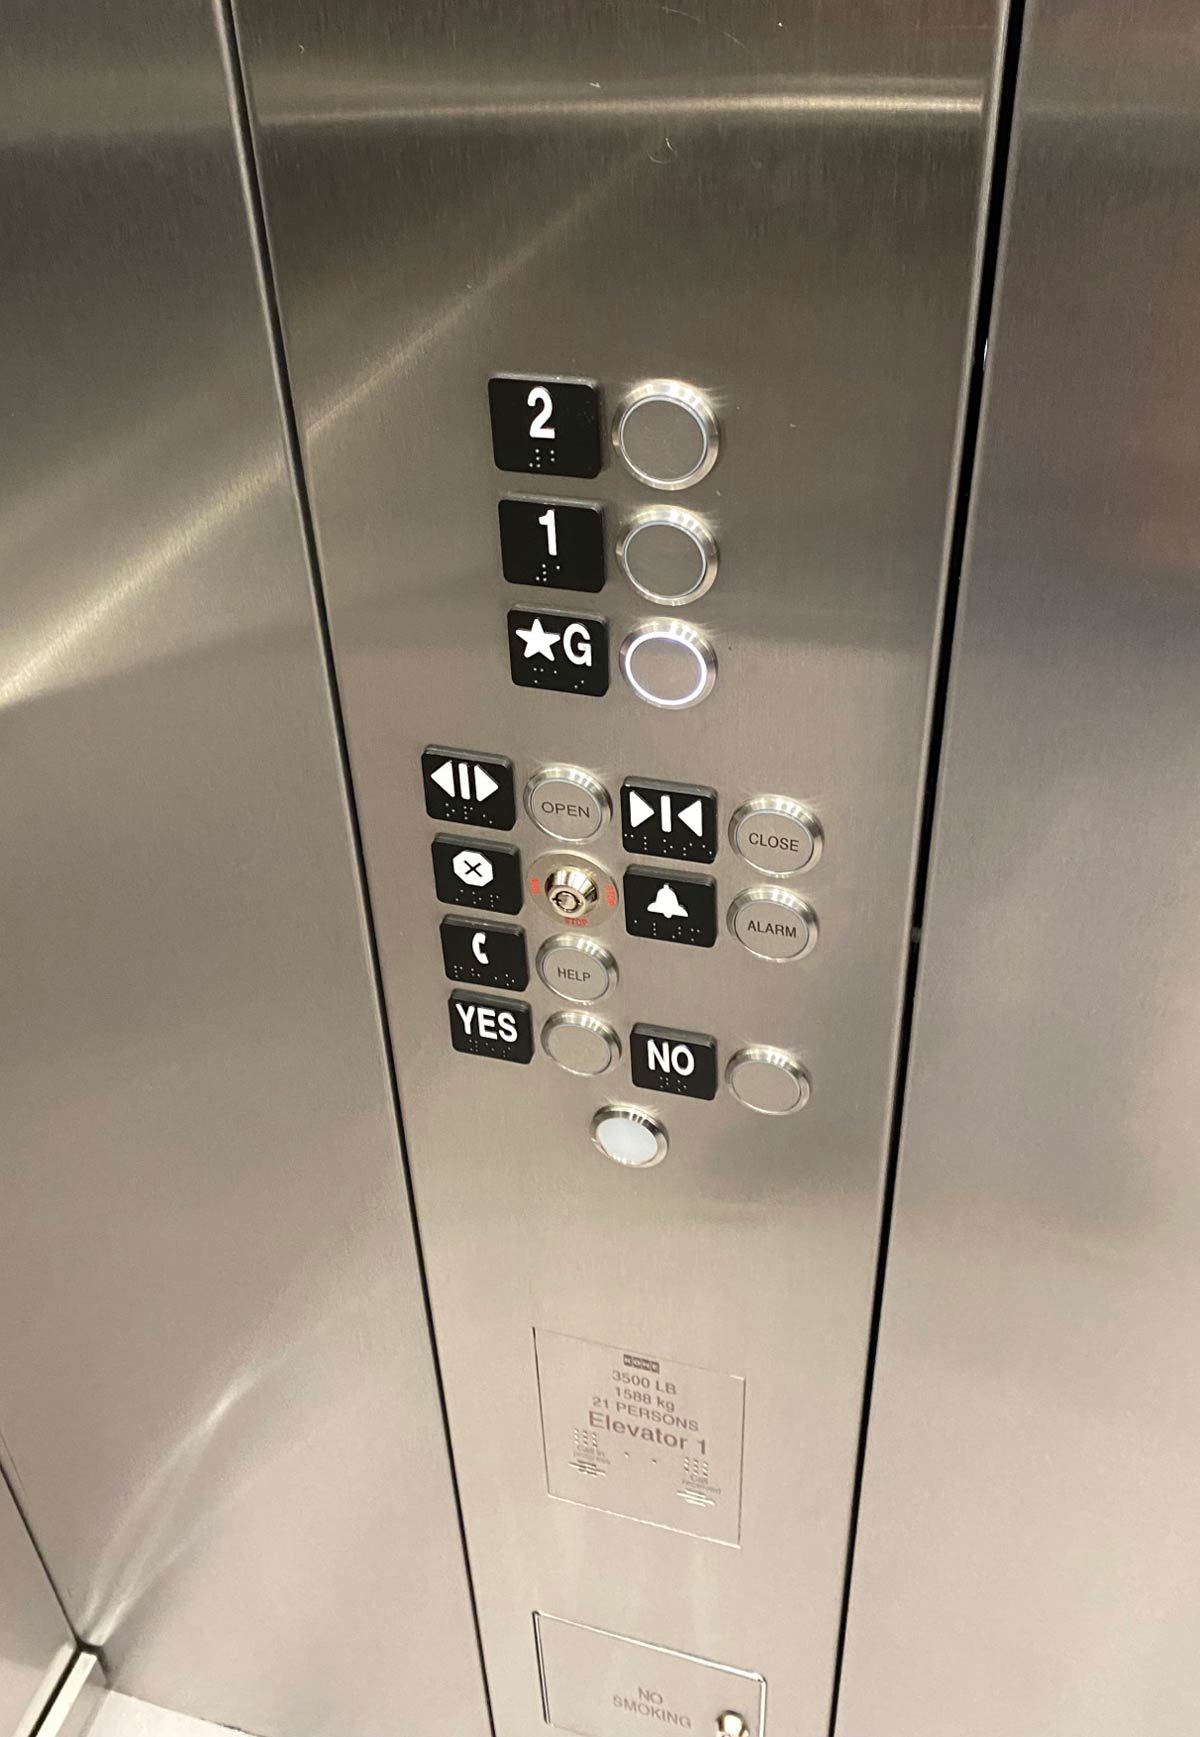 “Yes” and “No” buttons on the elevator where I work